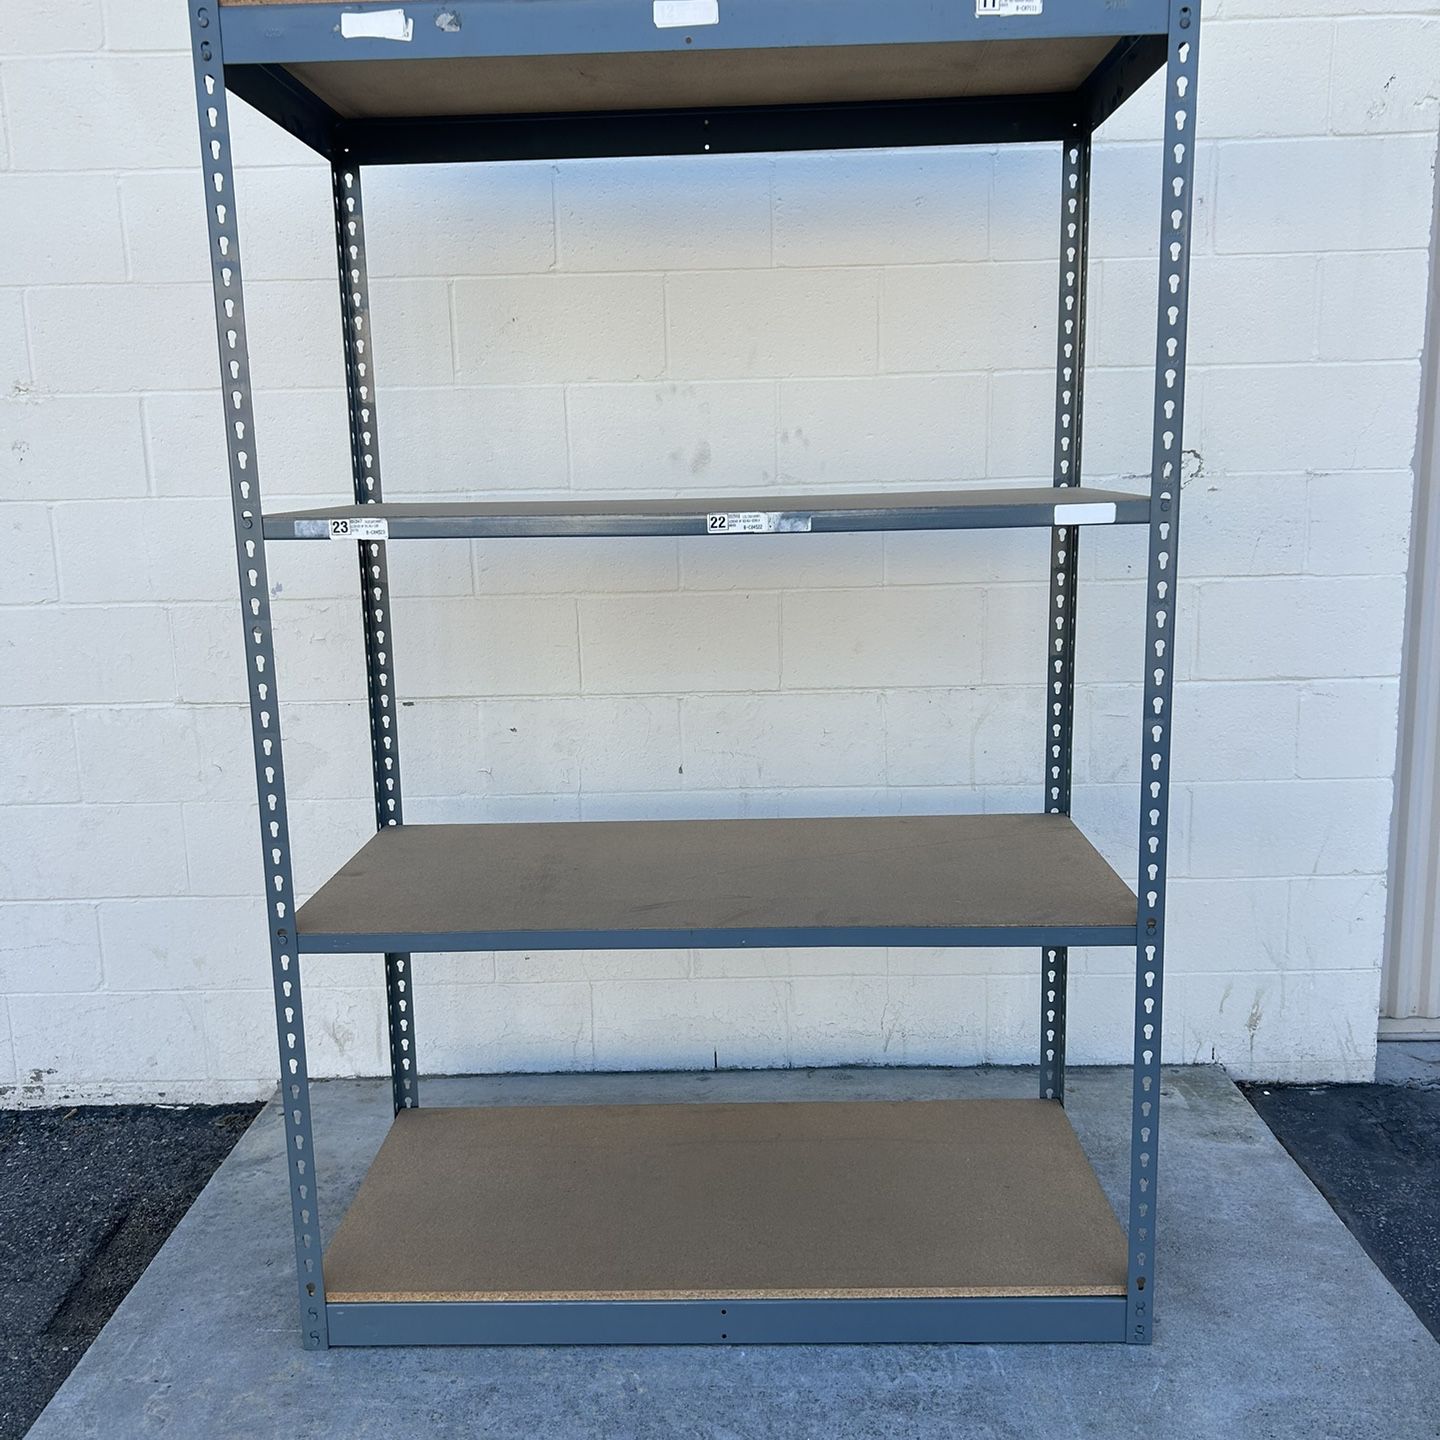 Industrial Shelves 4 Ft W X 2 Ft D Used! Warehouse Storage Shelving Boltless Supply Racks Better Than Homedepot Lowes Delivery Available